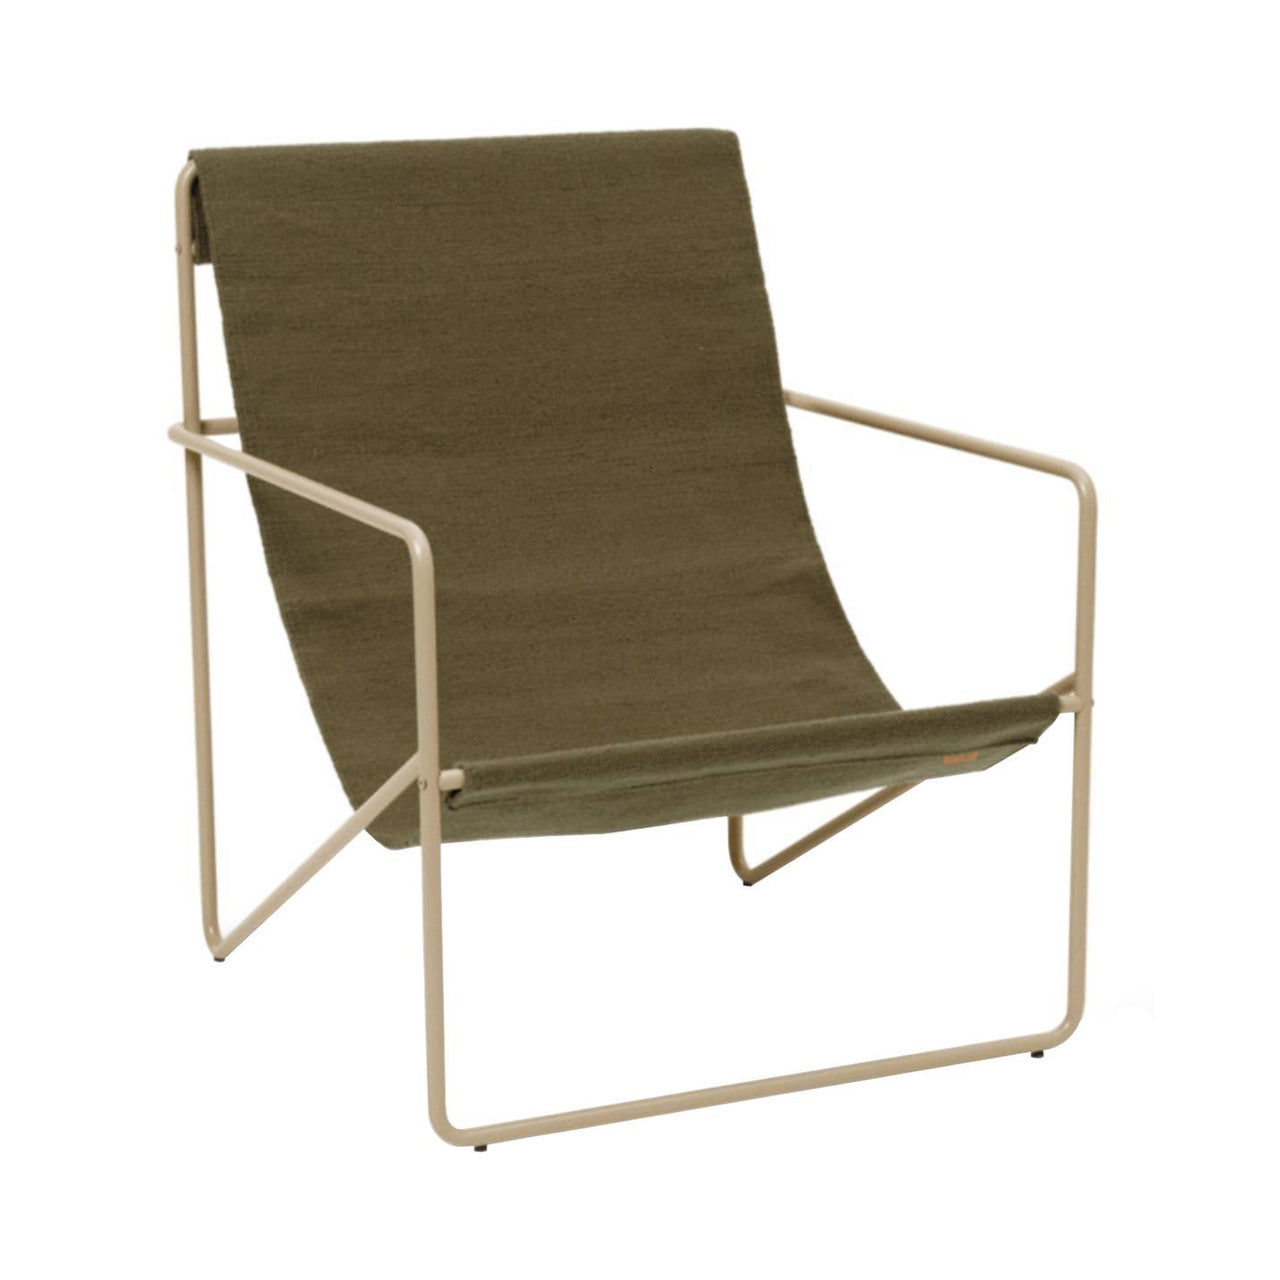 Desert Lounge Chair: Olive + Cashmere